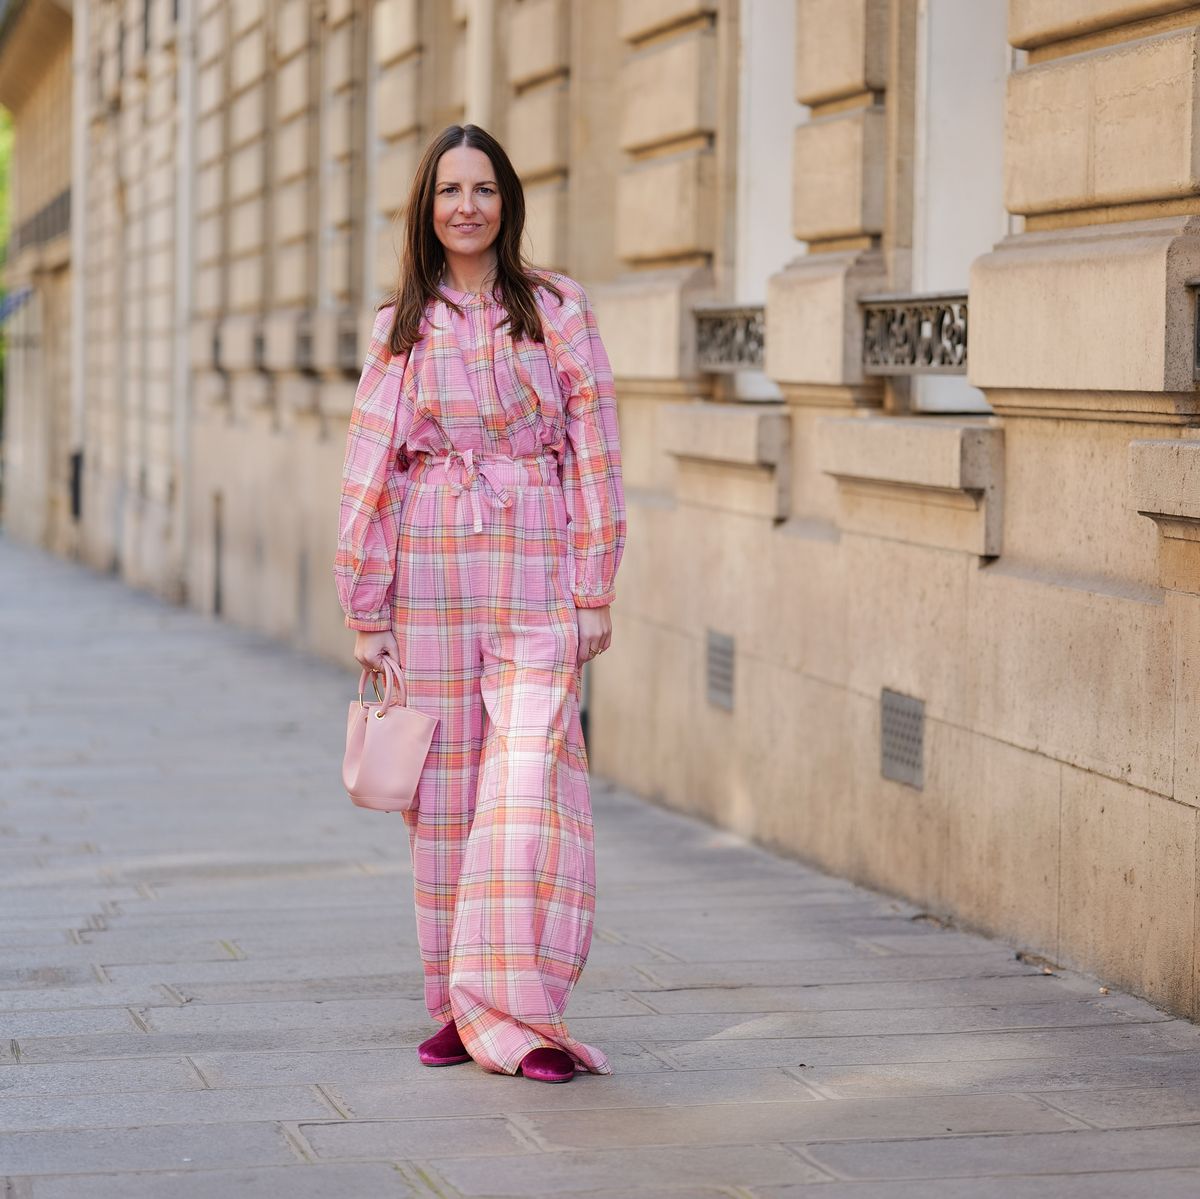 paris, france april 21 alba garavito torre wears gold earrings, a pale pink orange white checkered print pattern high neck puffy long sleeves shirt from the label edition, matching pale pink orange white checkered print pattern large wide legs pants from the label edition, a pale pink shiny leather handbag, gold rings, neon pink velvet loafers from babouches frulan, during a street style fashion photo session, on april 21, 2023 in paris, france photo by edward berthelotgetty images